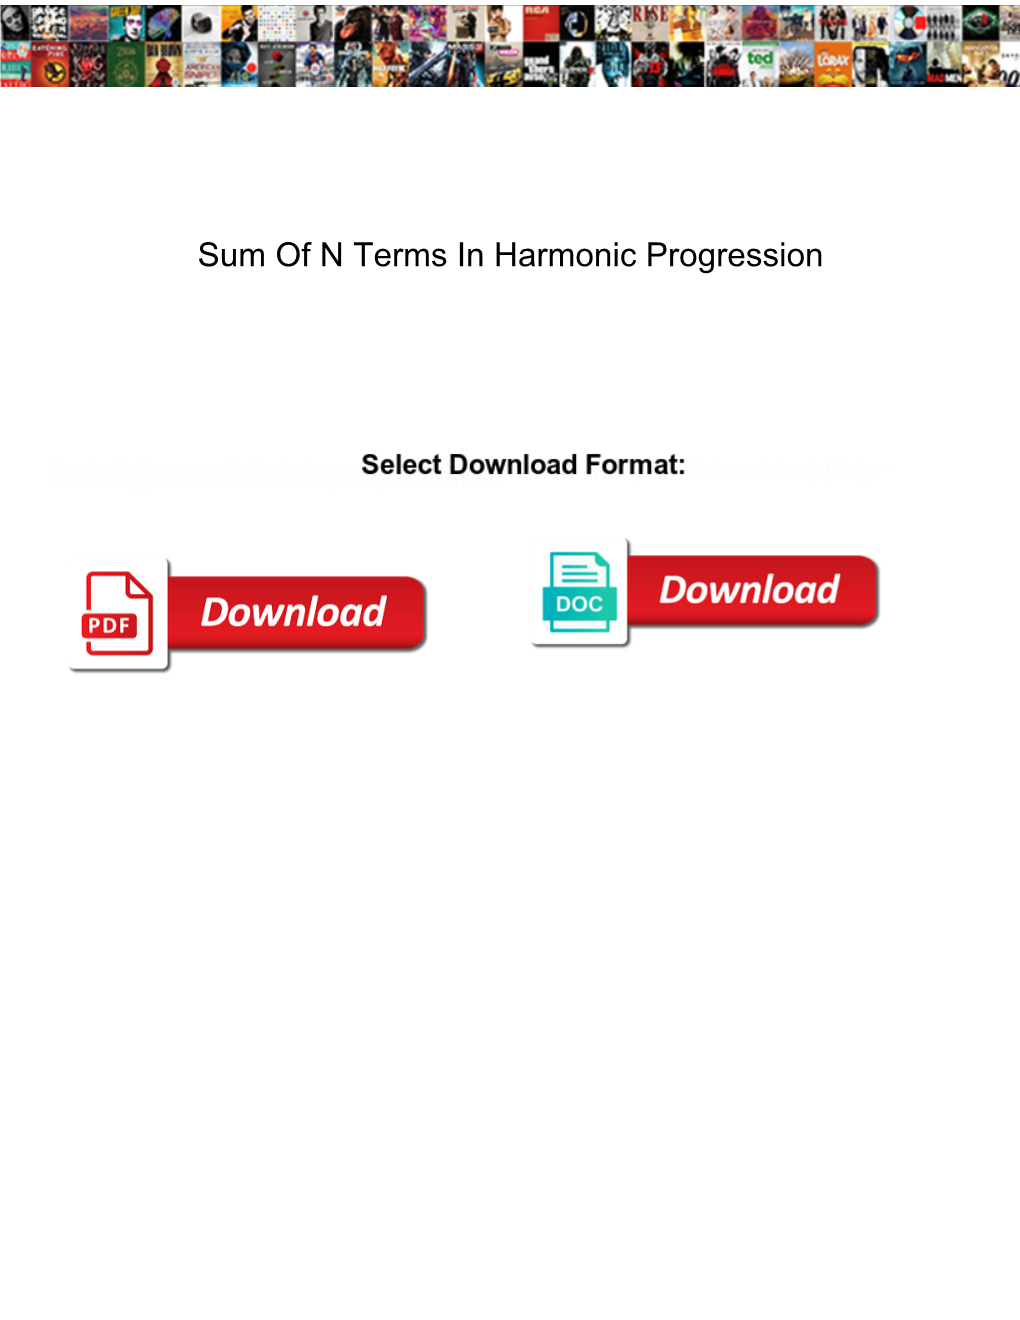 Sum of N Terms in Harmonic Progression